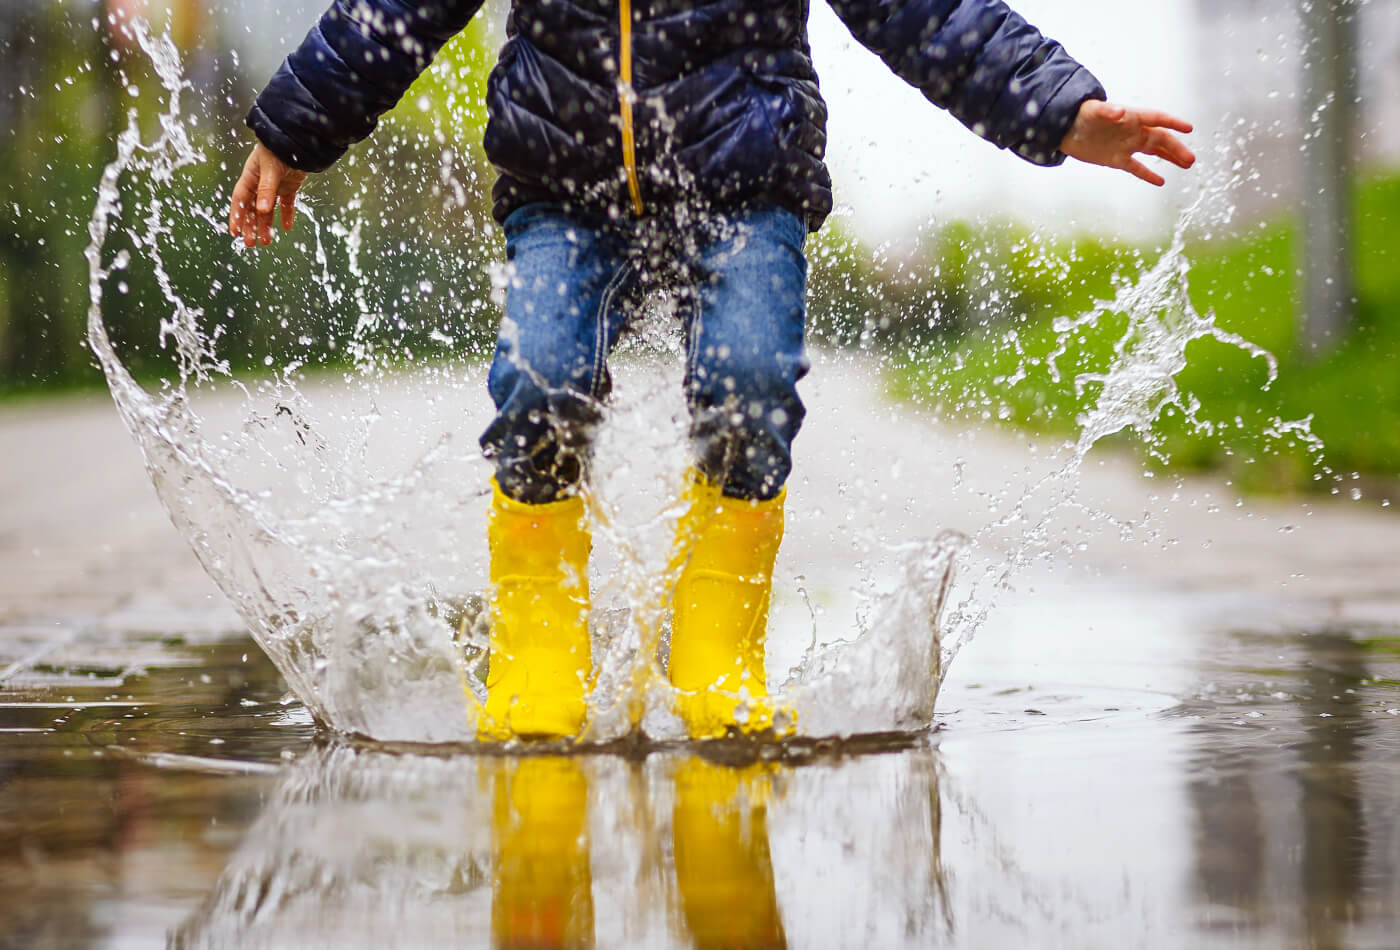 A young child in yellow wellington boots jumping into a puddle